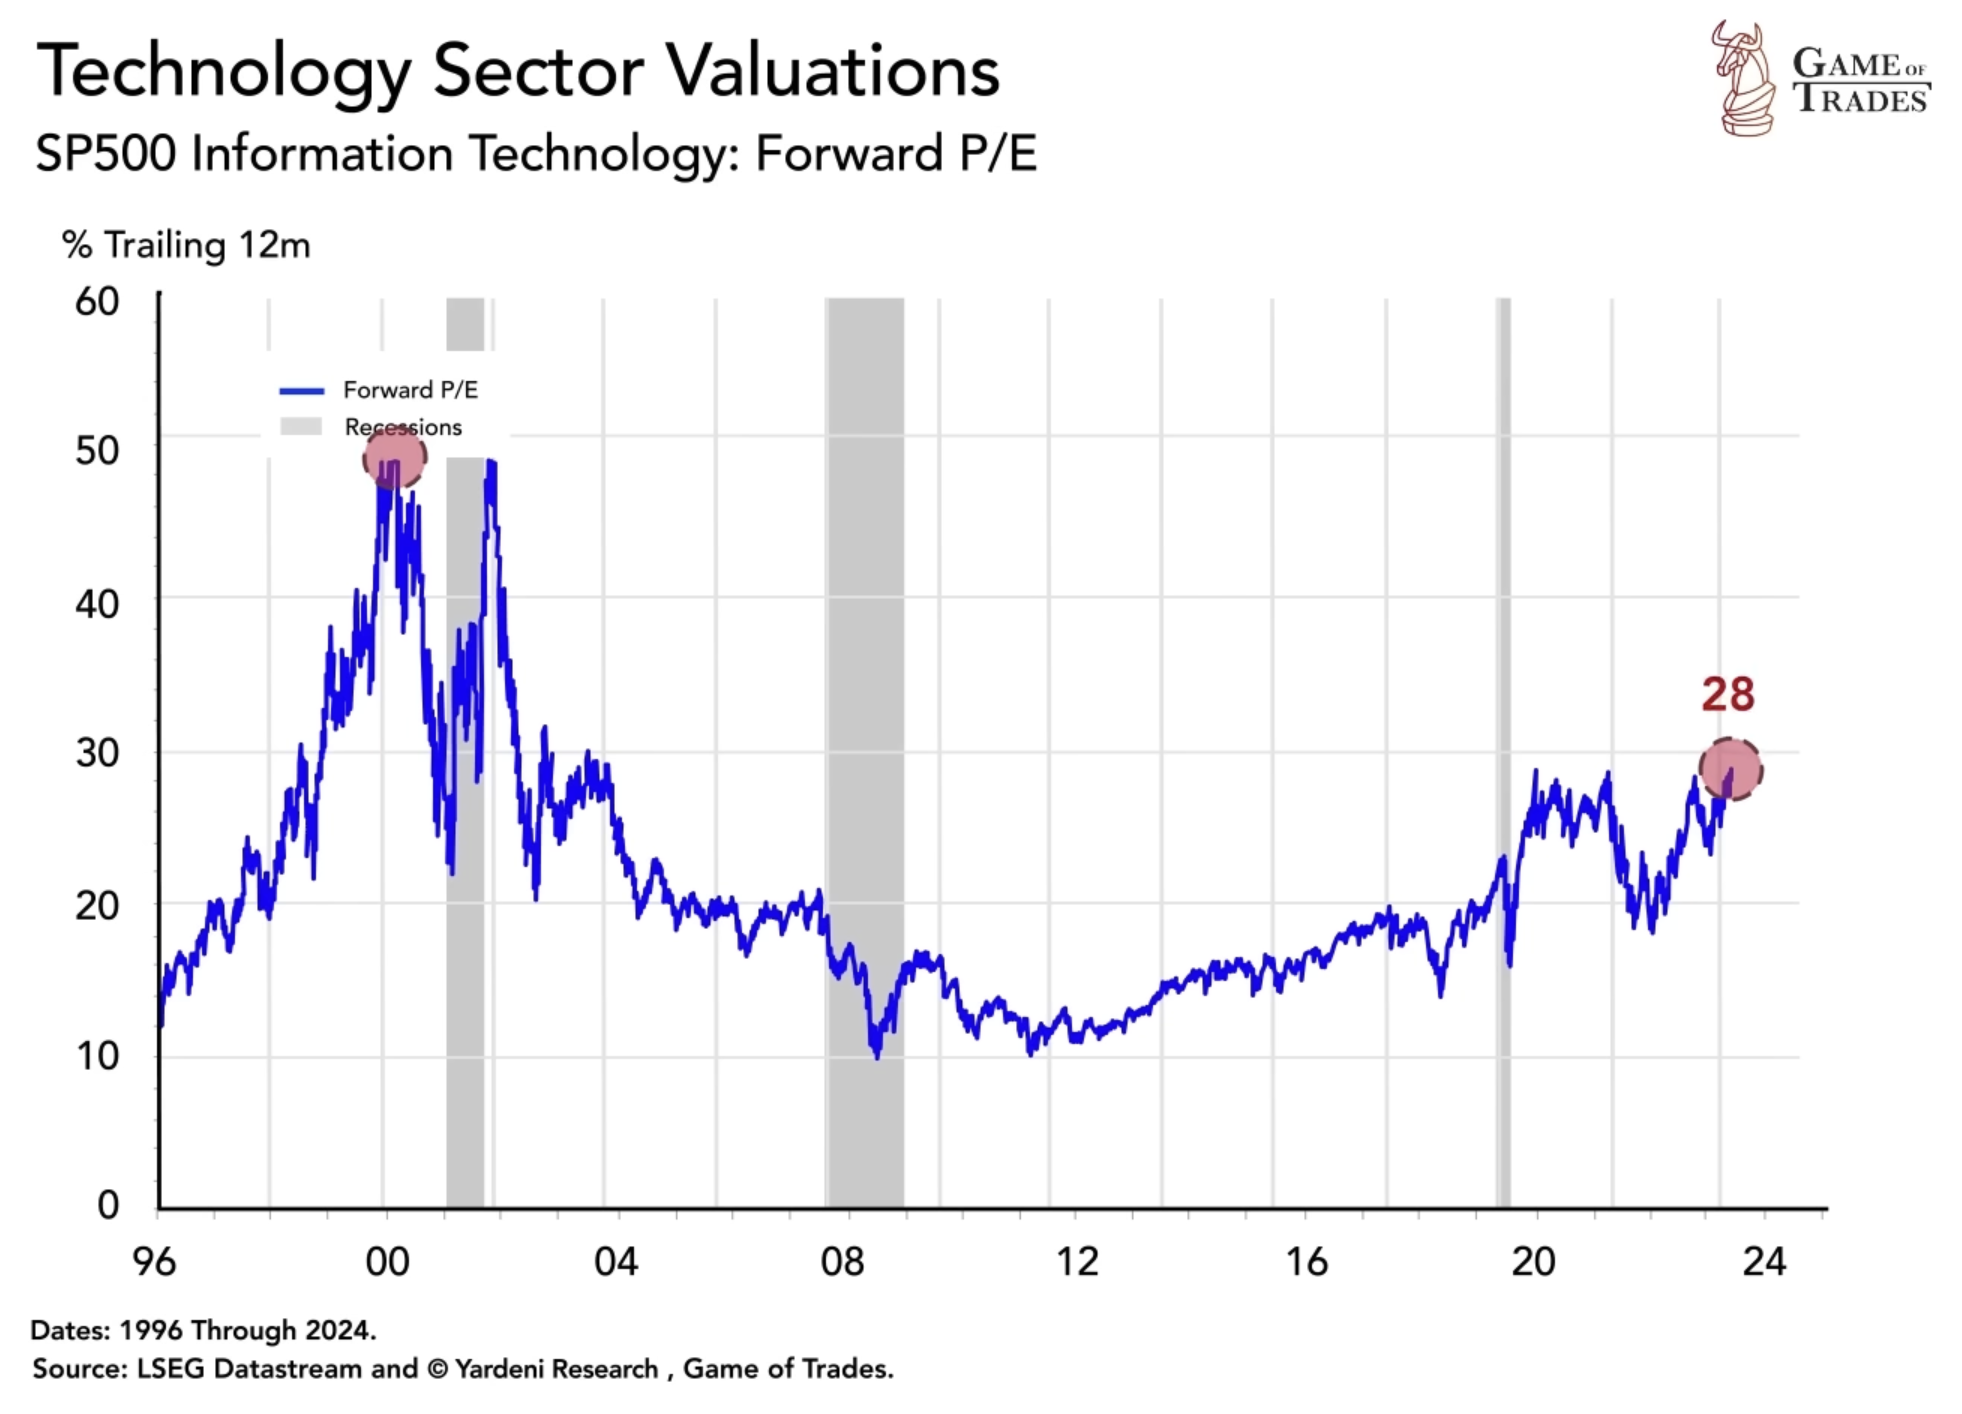 Technology sector valuations